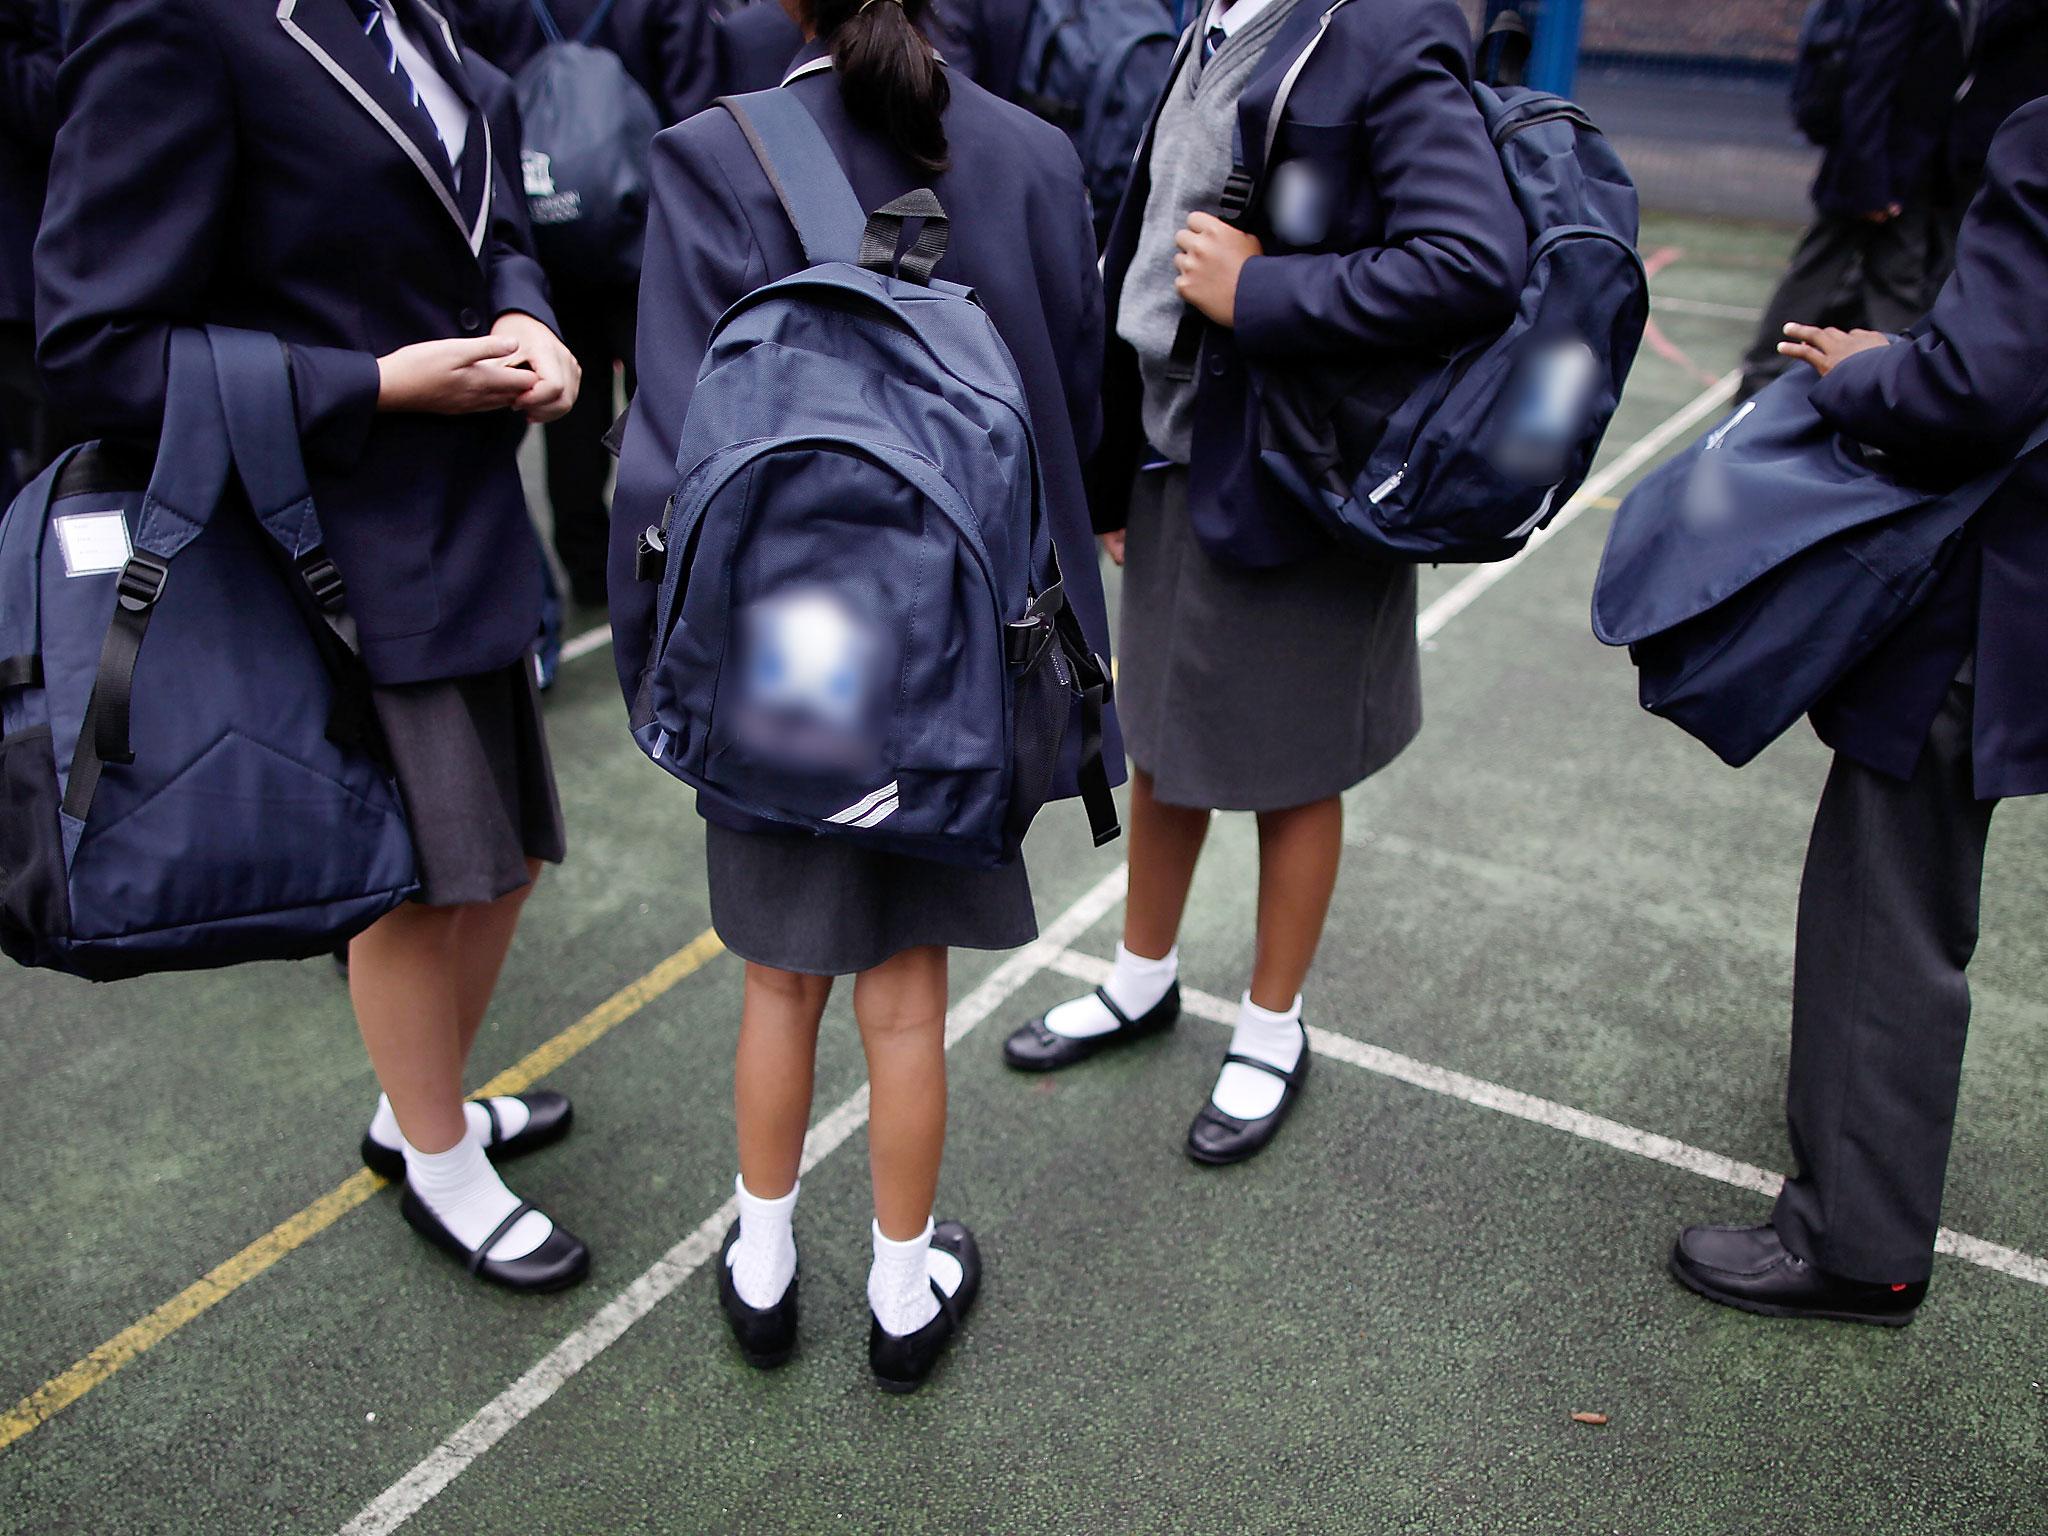 School pupils assemble in a playground